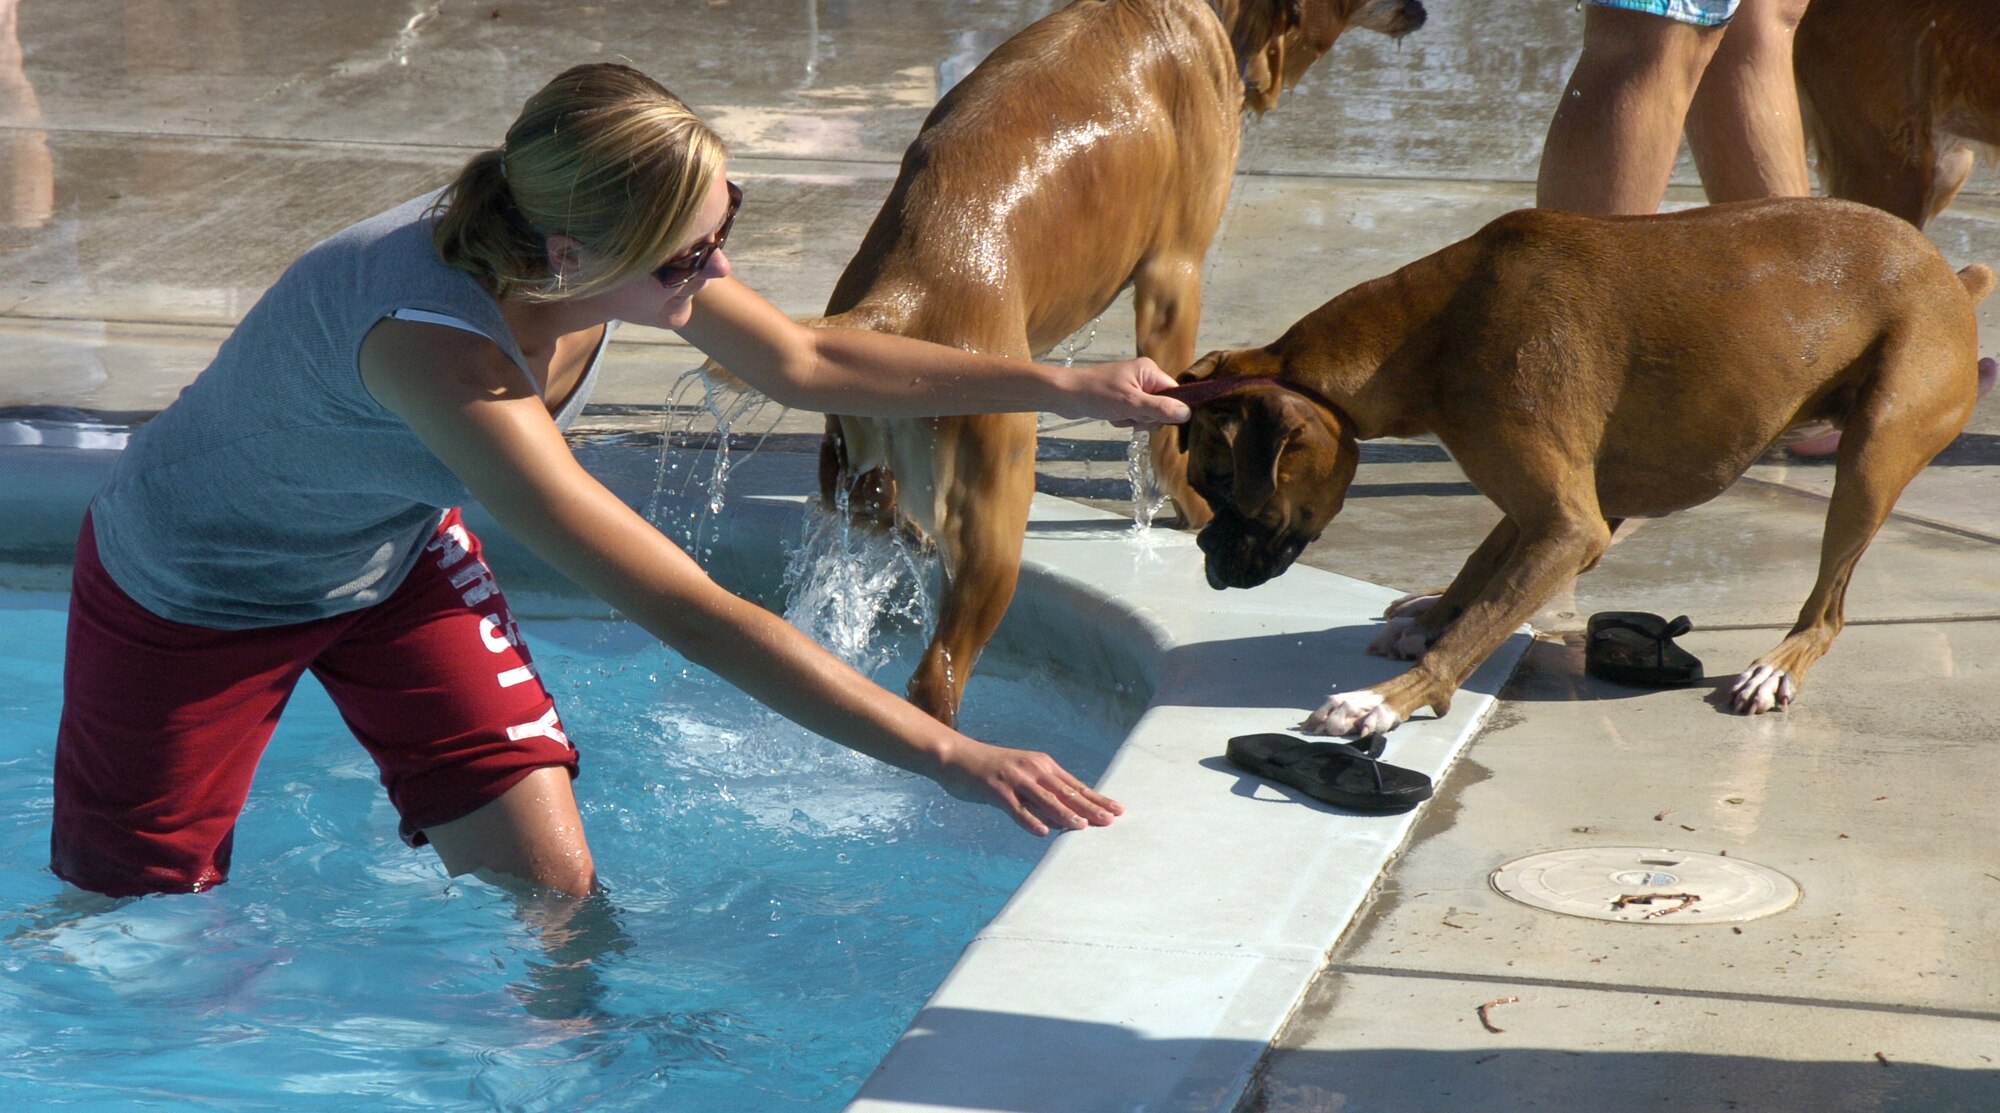 Sarah Hanych, a contractor with Lear Siegler, coaxes her dog Liberty to join her in the #3 base pool. The pet pool party is an annual event held close to the end of summer for families to spend time with their pets.